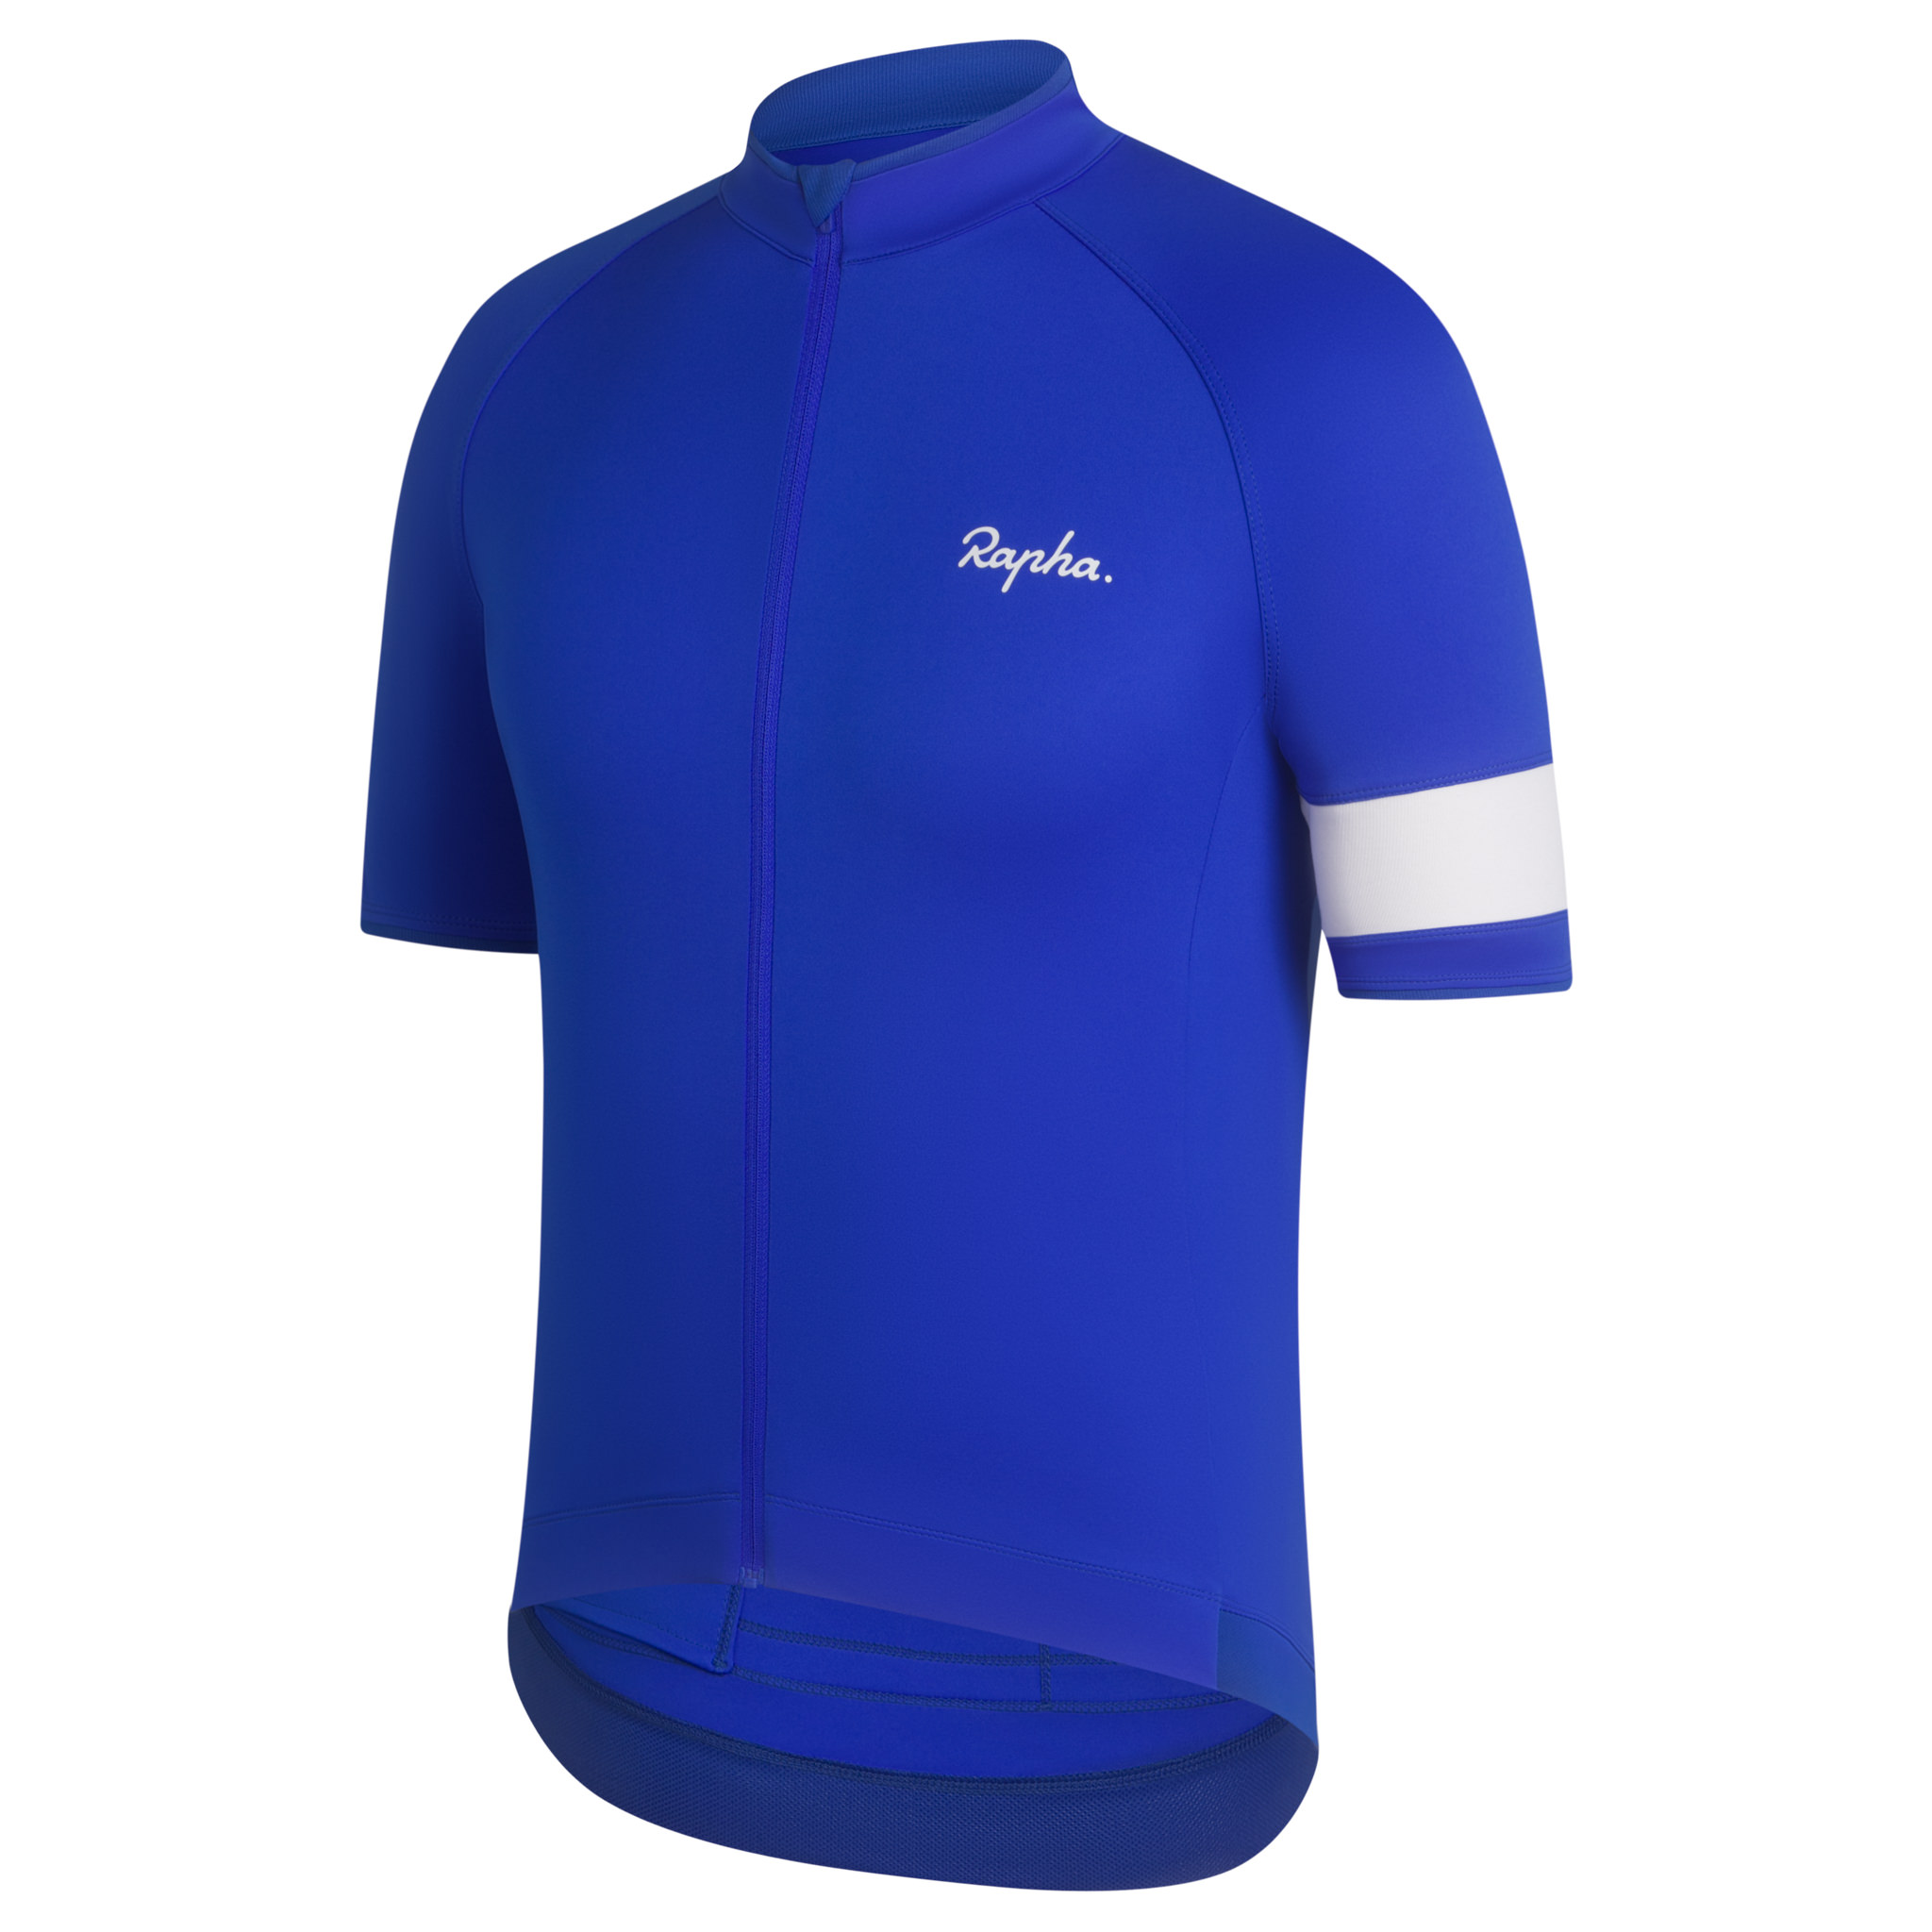 Rapha Core Cycling Jacket in Blue : Mens Rapha UK Outlet at SEIKK